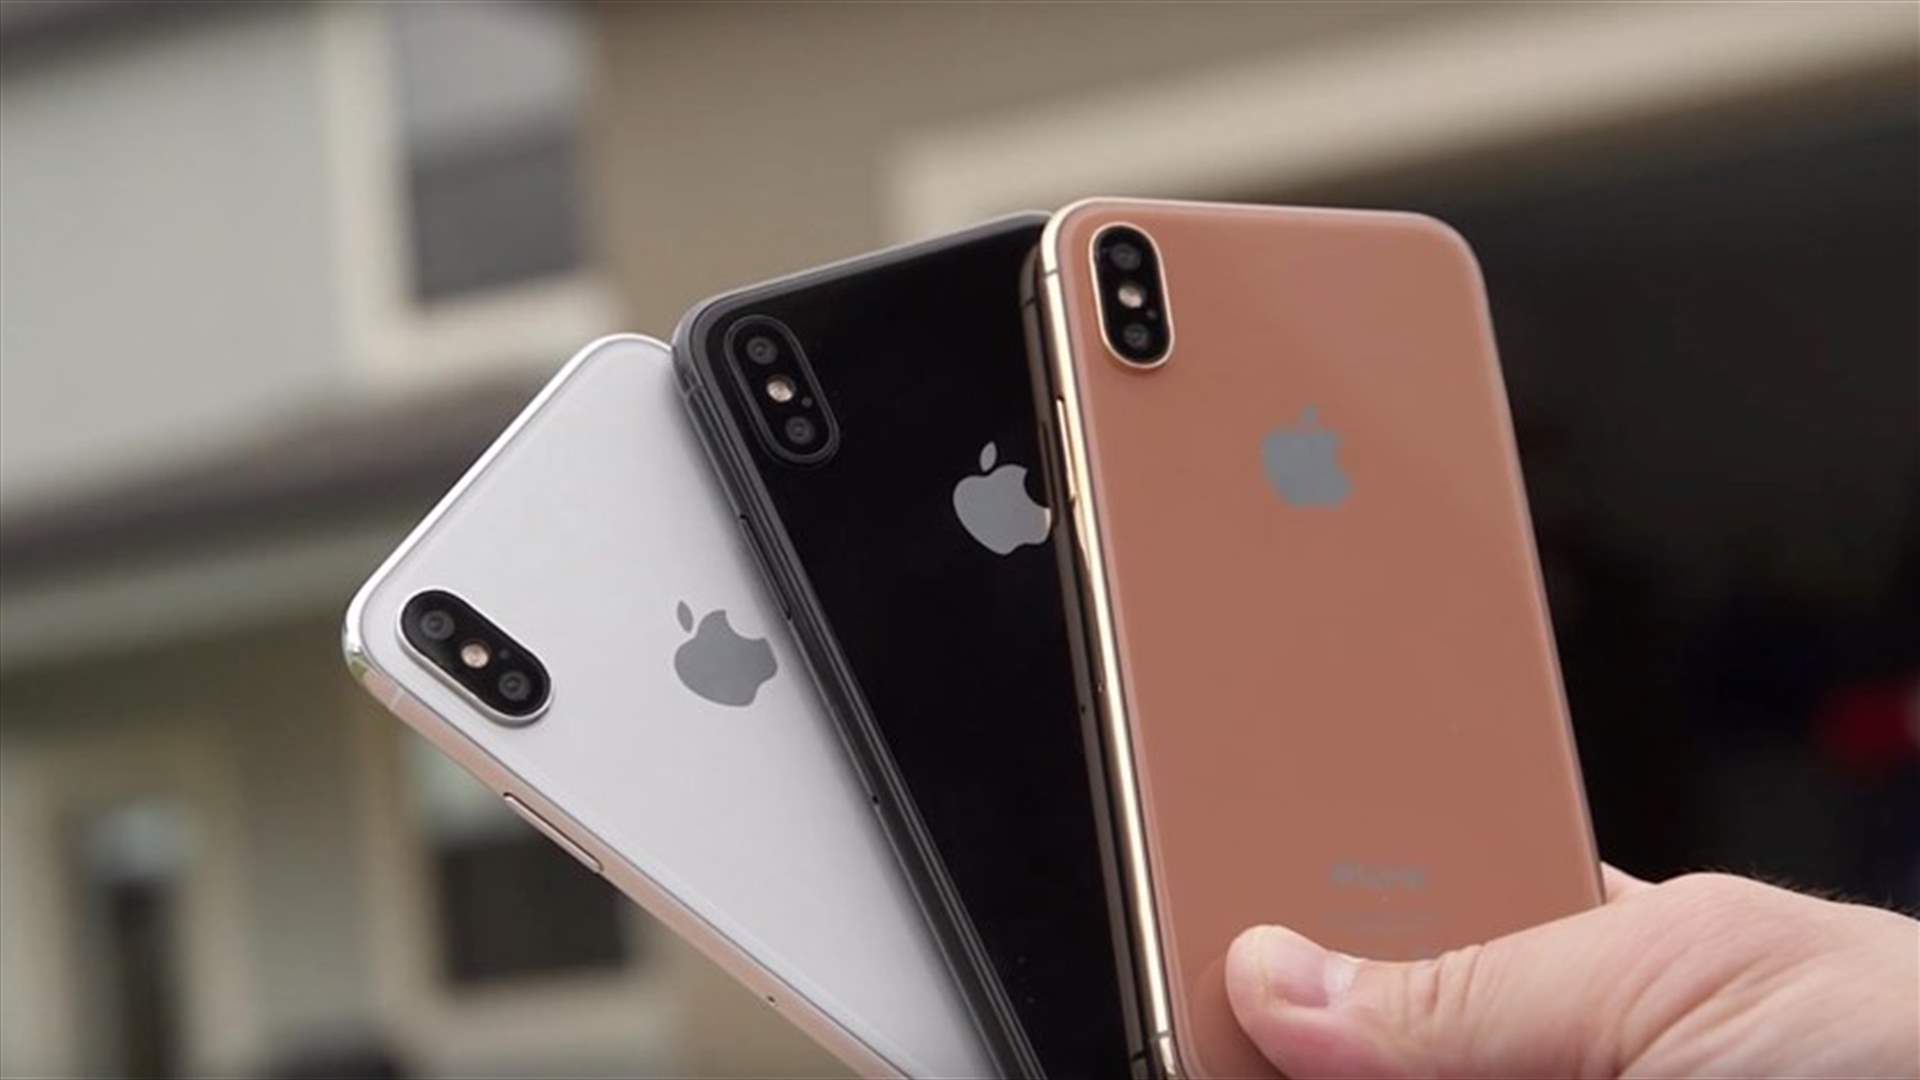 VIDEO Offers Clear Look At iPhone 8’s Three Color Variant